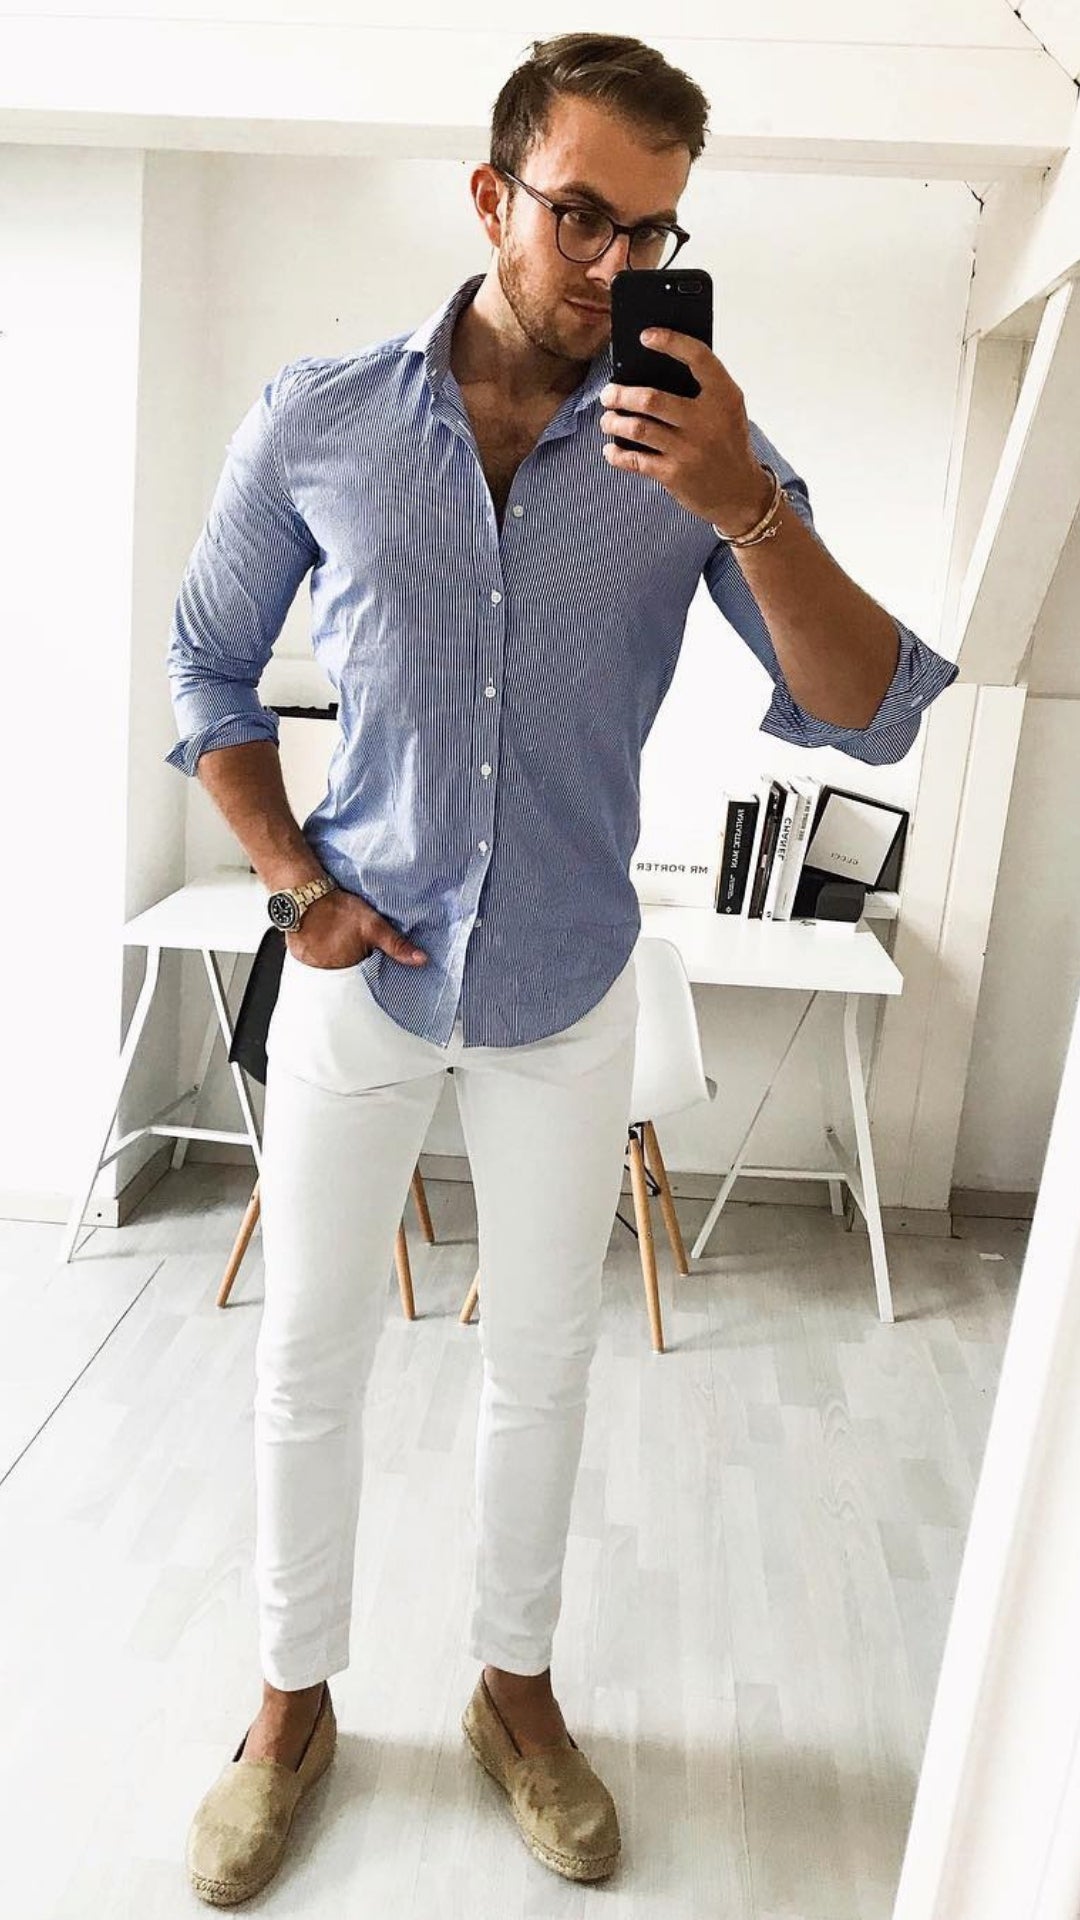 How do women feel about men wearing white pants? : r/OUTFITS